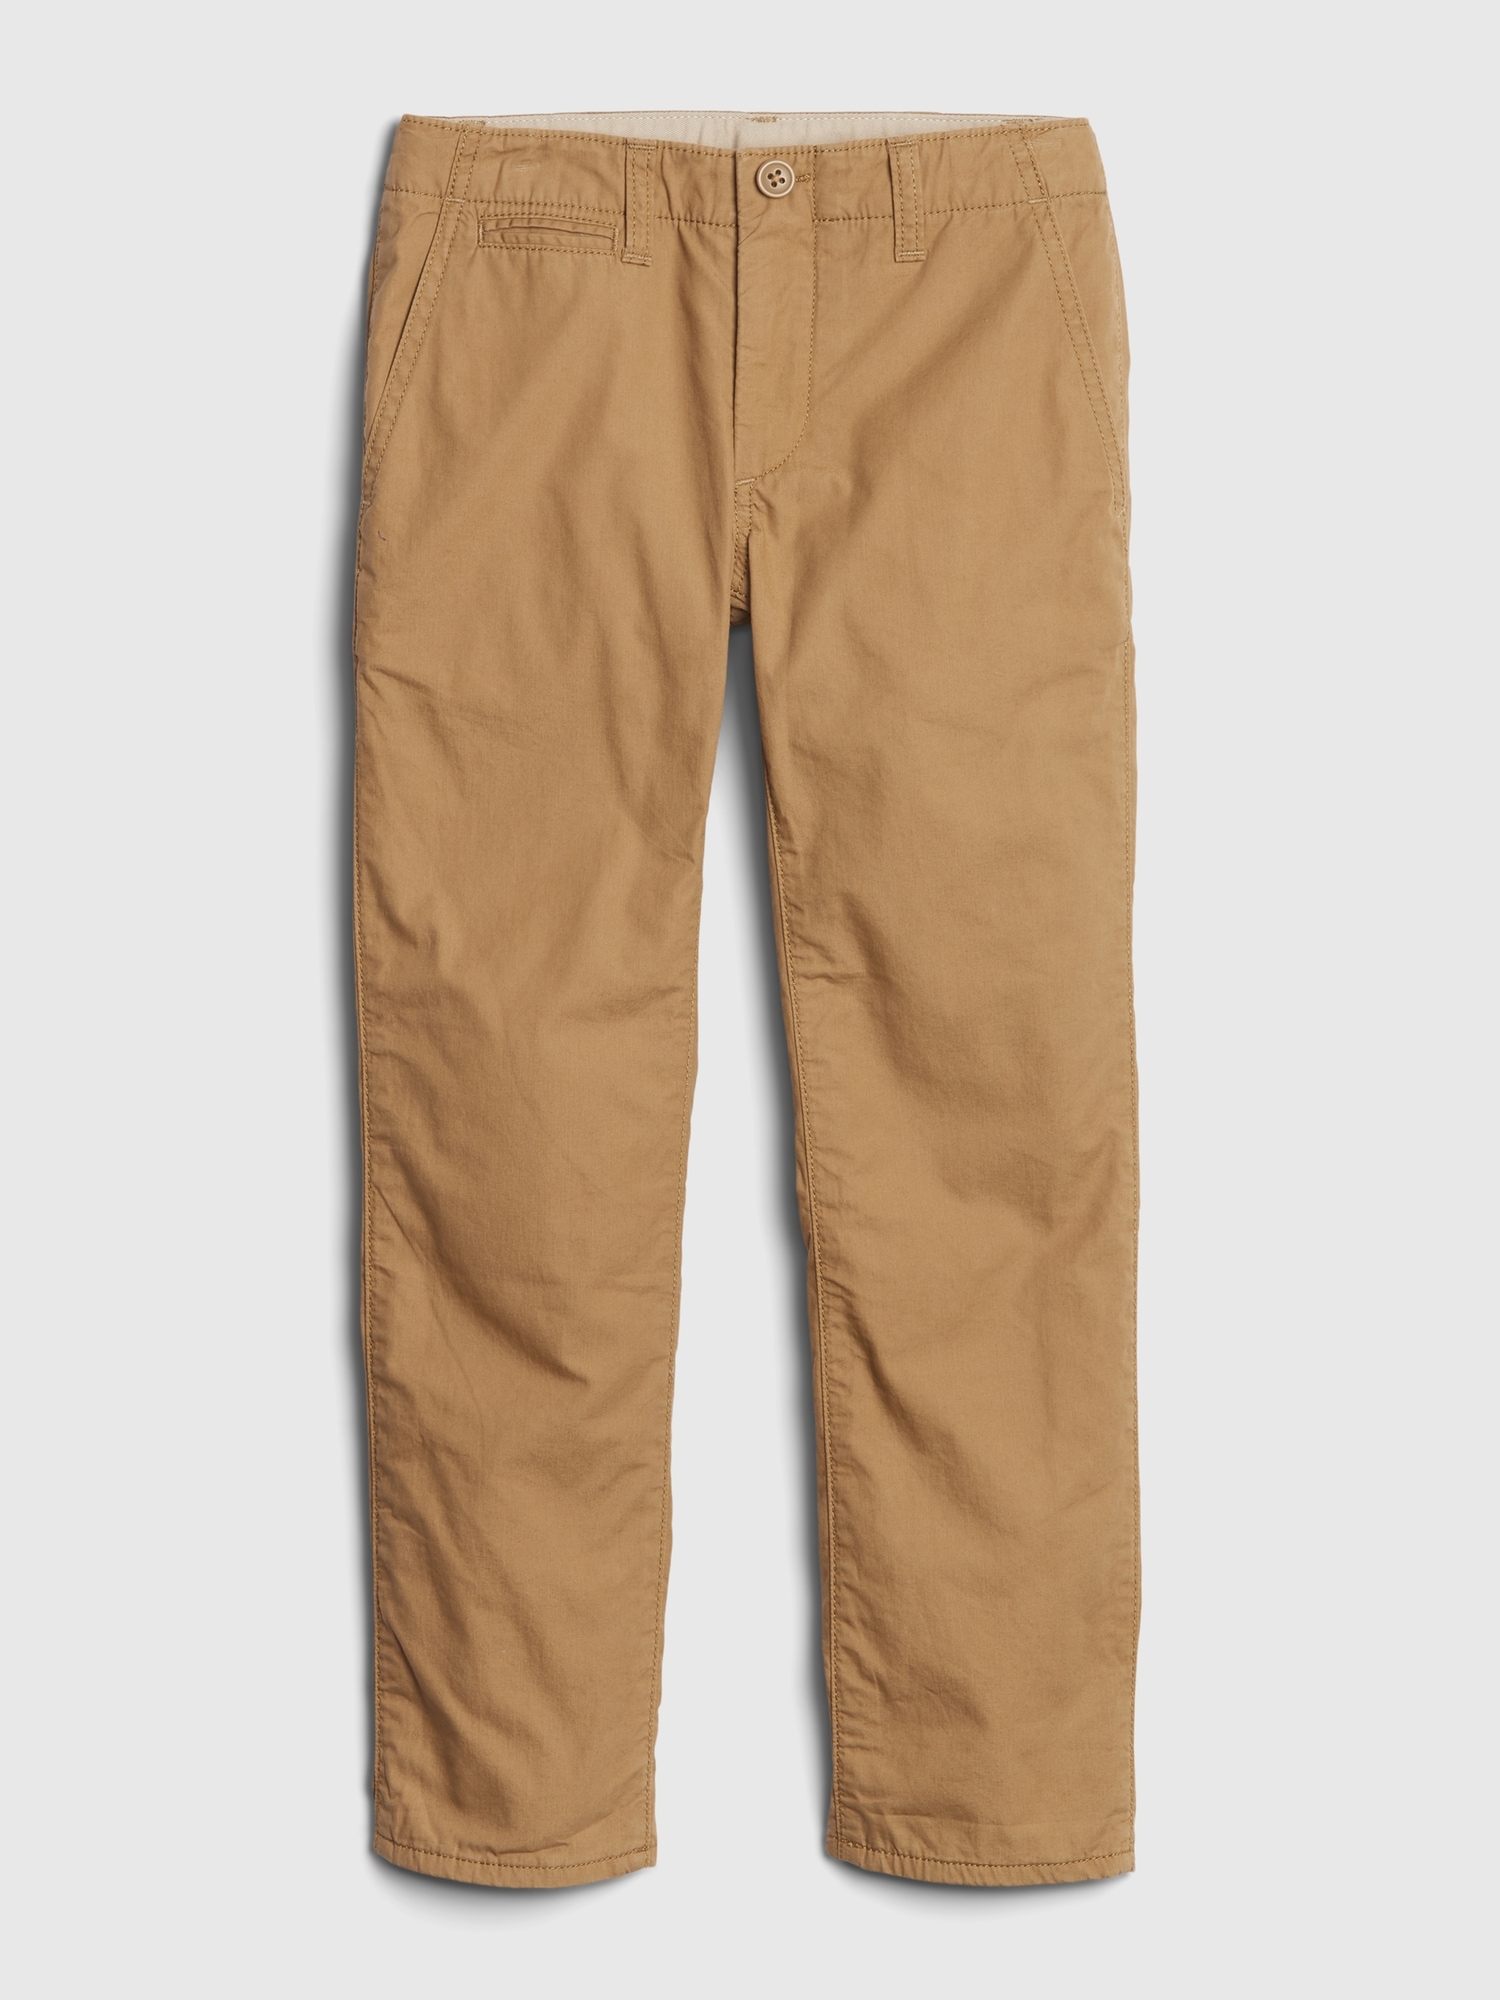 Kids Lined Lived In Khakis | Gap